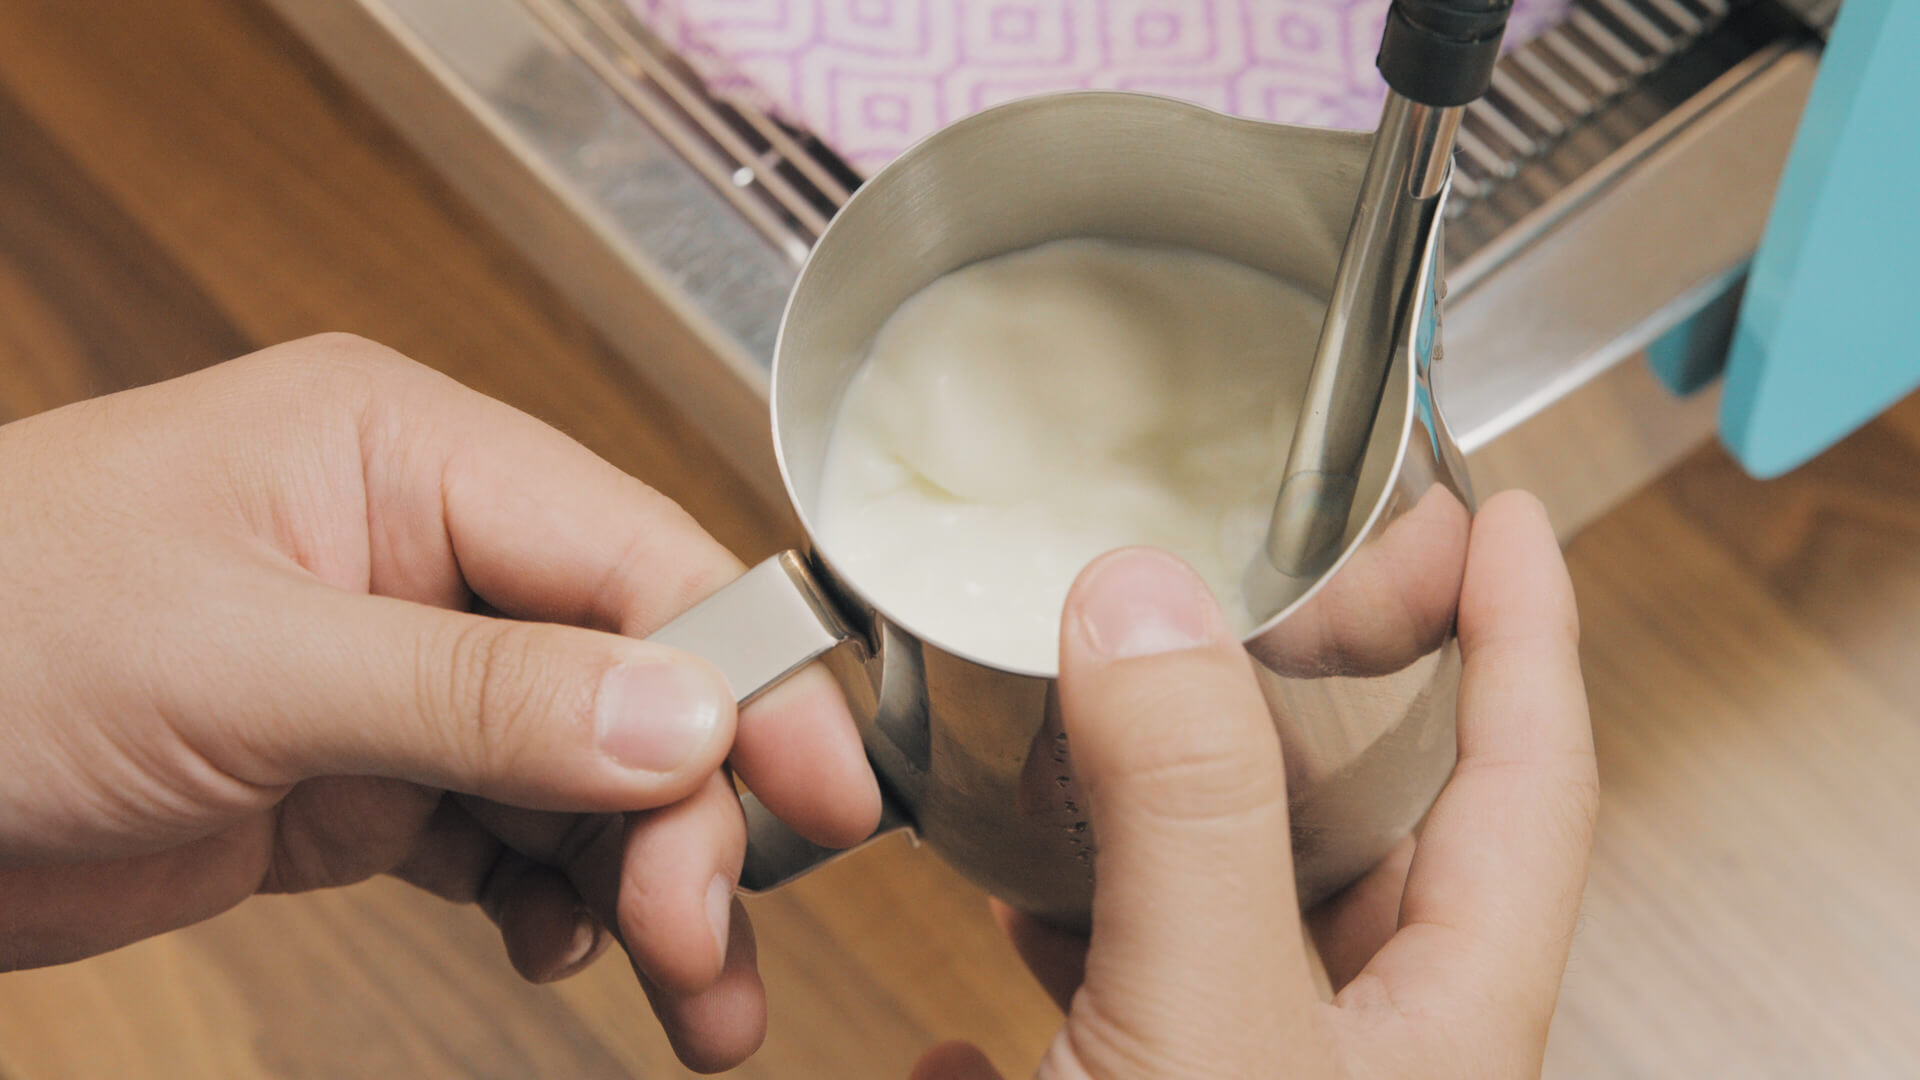 How To Steam Milk (With Or Without A Steam Wand)